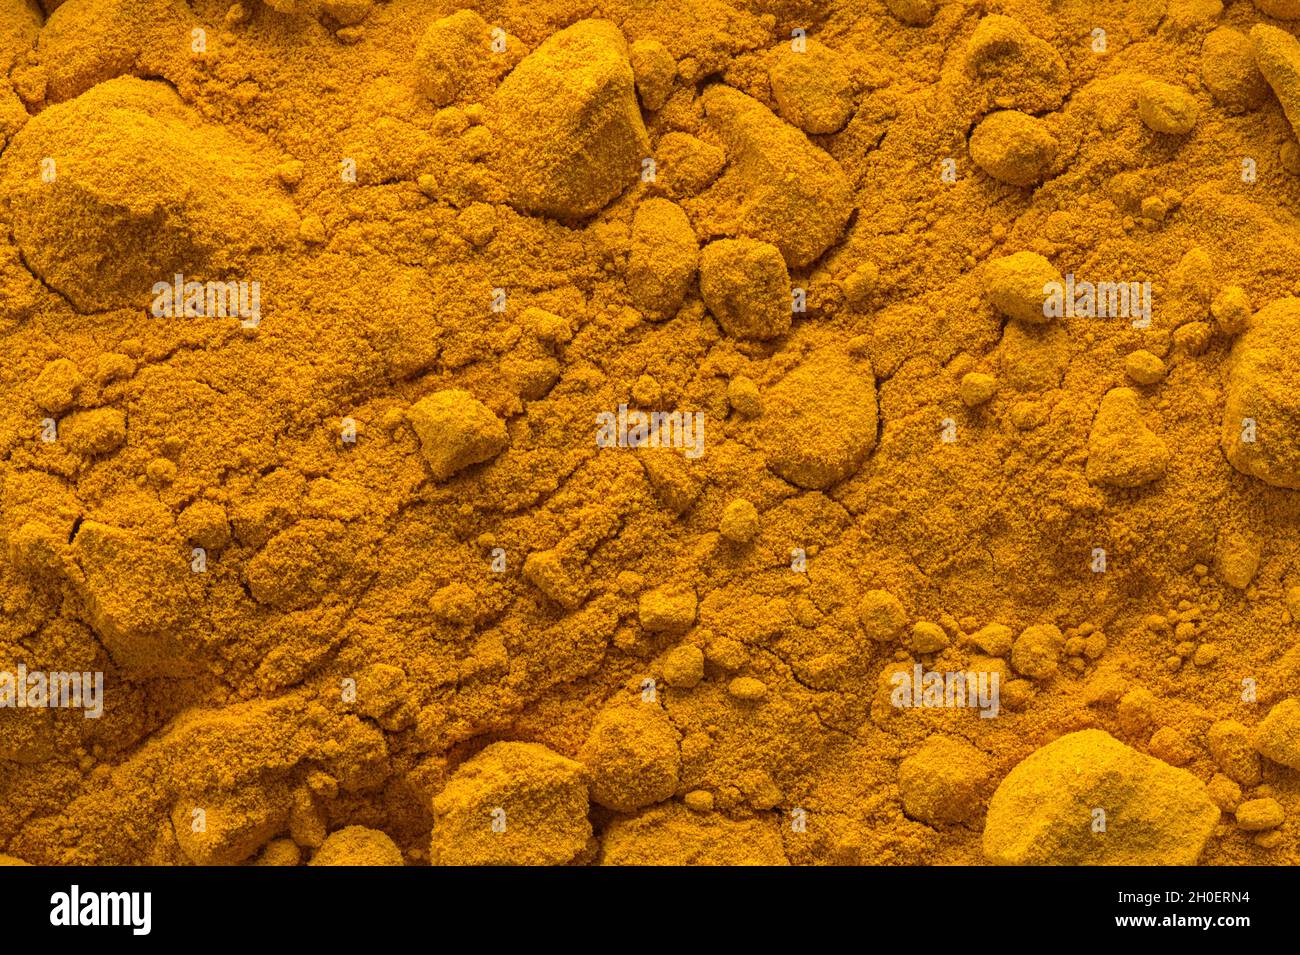 Pile of Turmeric Powder Spice Background Texture. Stock Photo